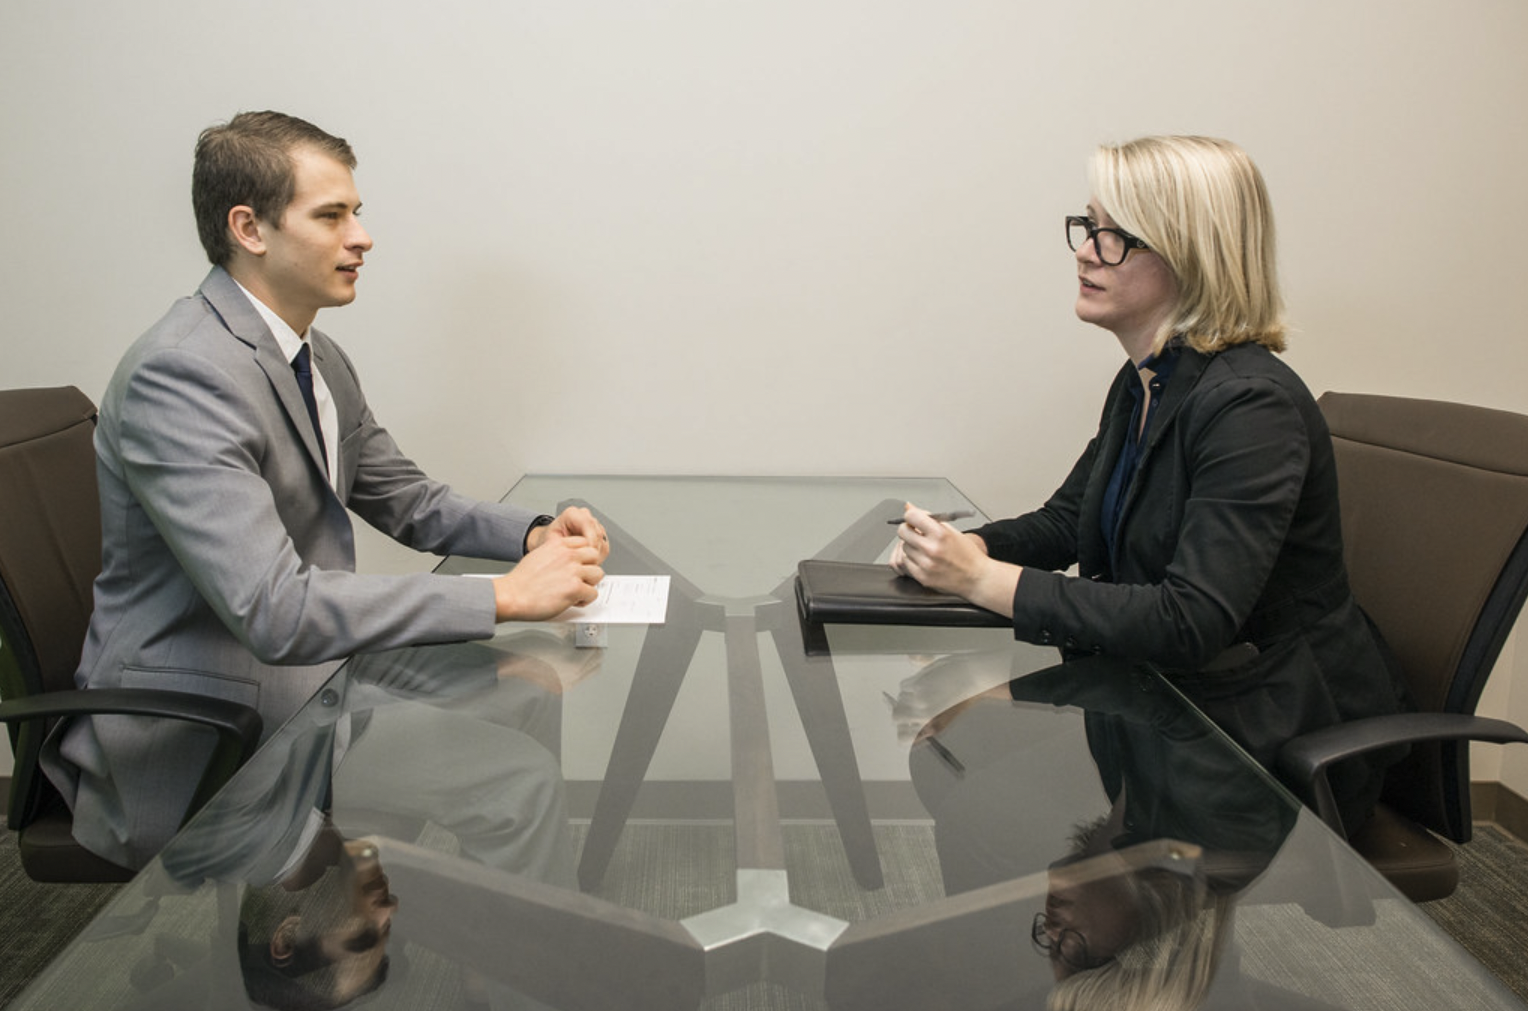 Questions to Ask Potential Employers during a Job Interview